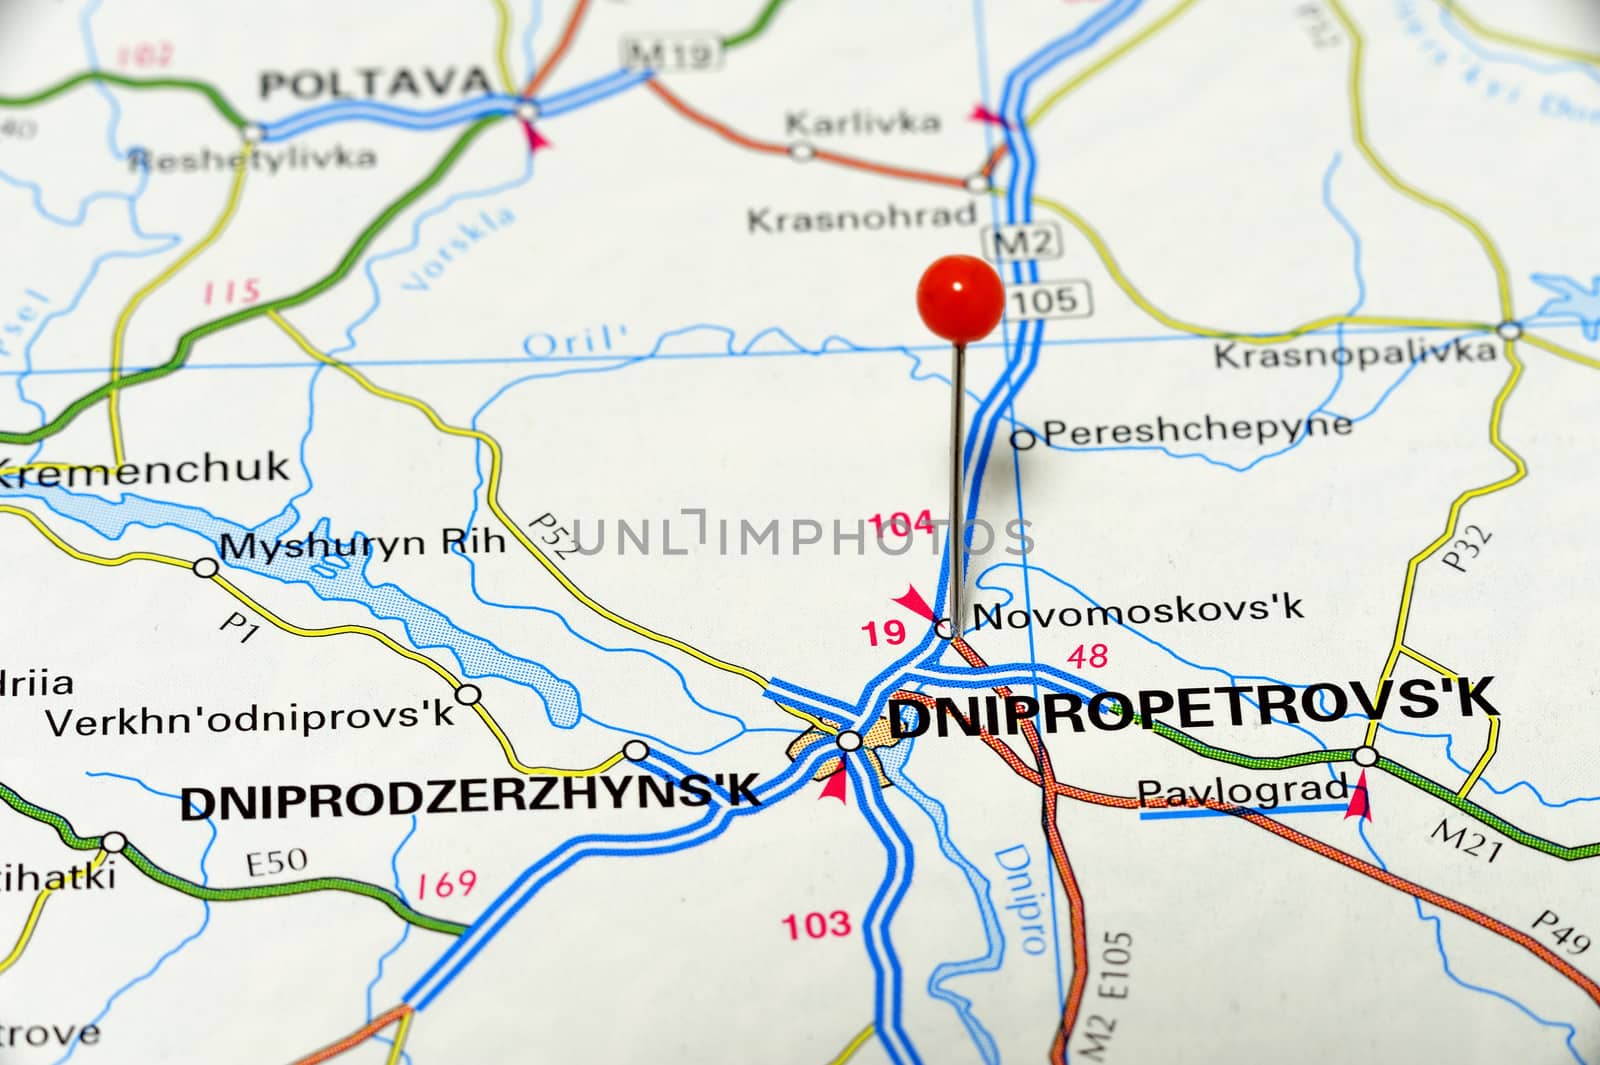 Closeup map of Dnipropetrovsk. Dnipropetrovsk a city in Ukraine.